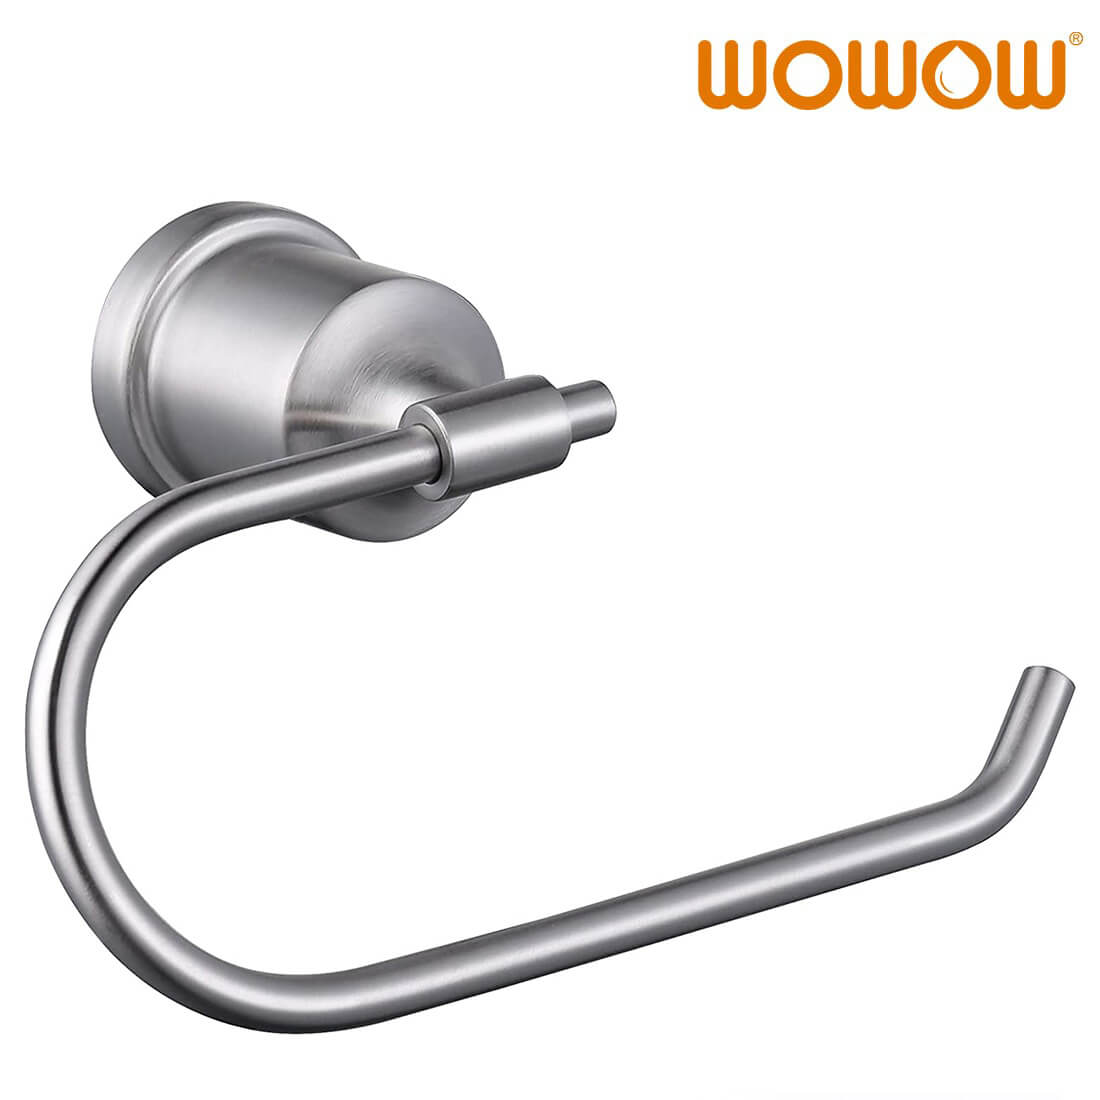 wowow brushed nickel toilet paper roll holder wall mount toilet tissue holder